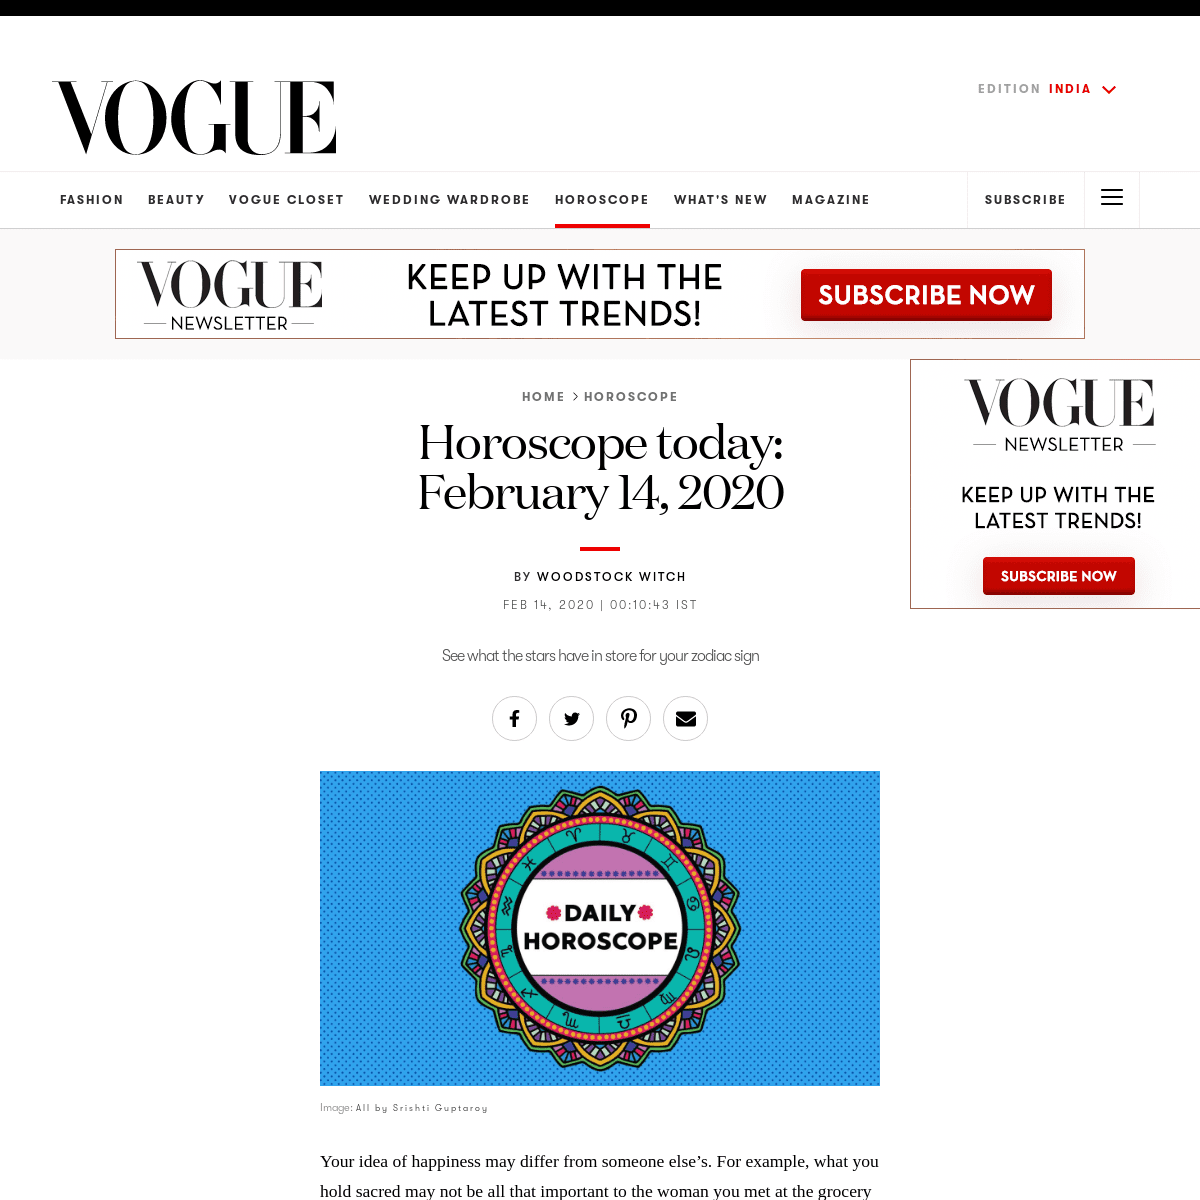 A complete backup of www.vogue.in/horoscope/collection/daily-horoscope-today-14-02-2020-zodiac-signs/